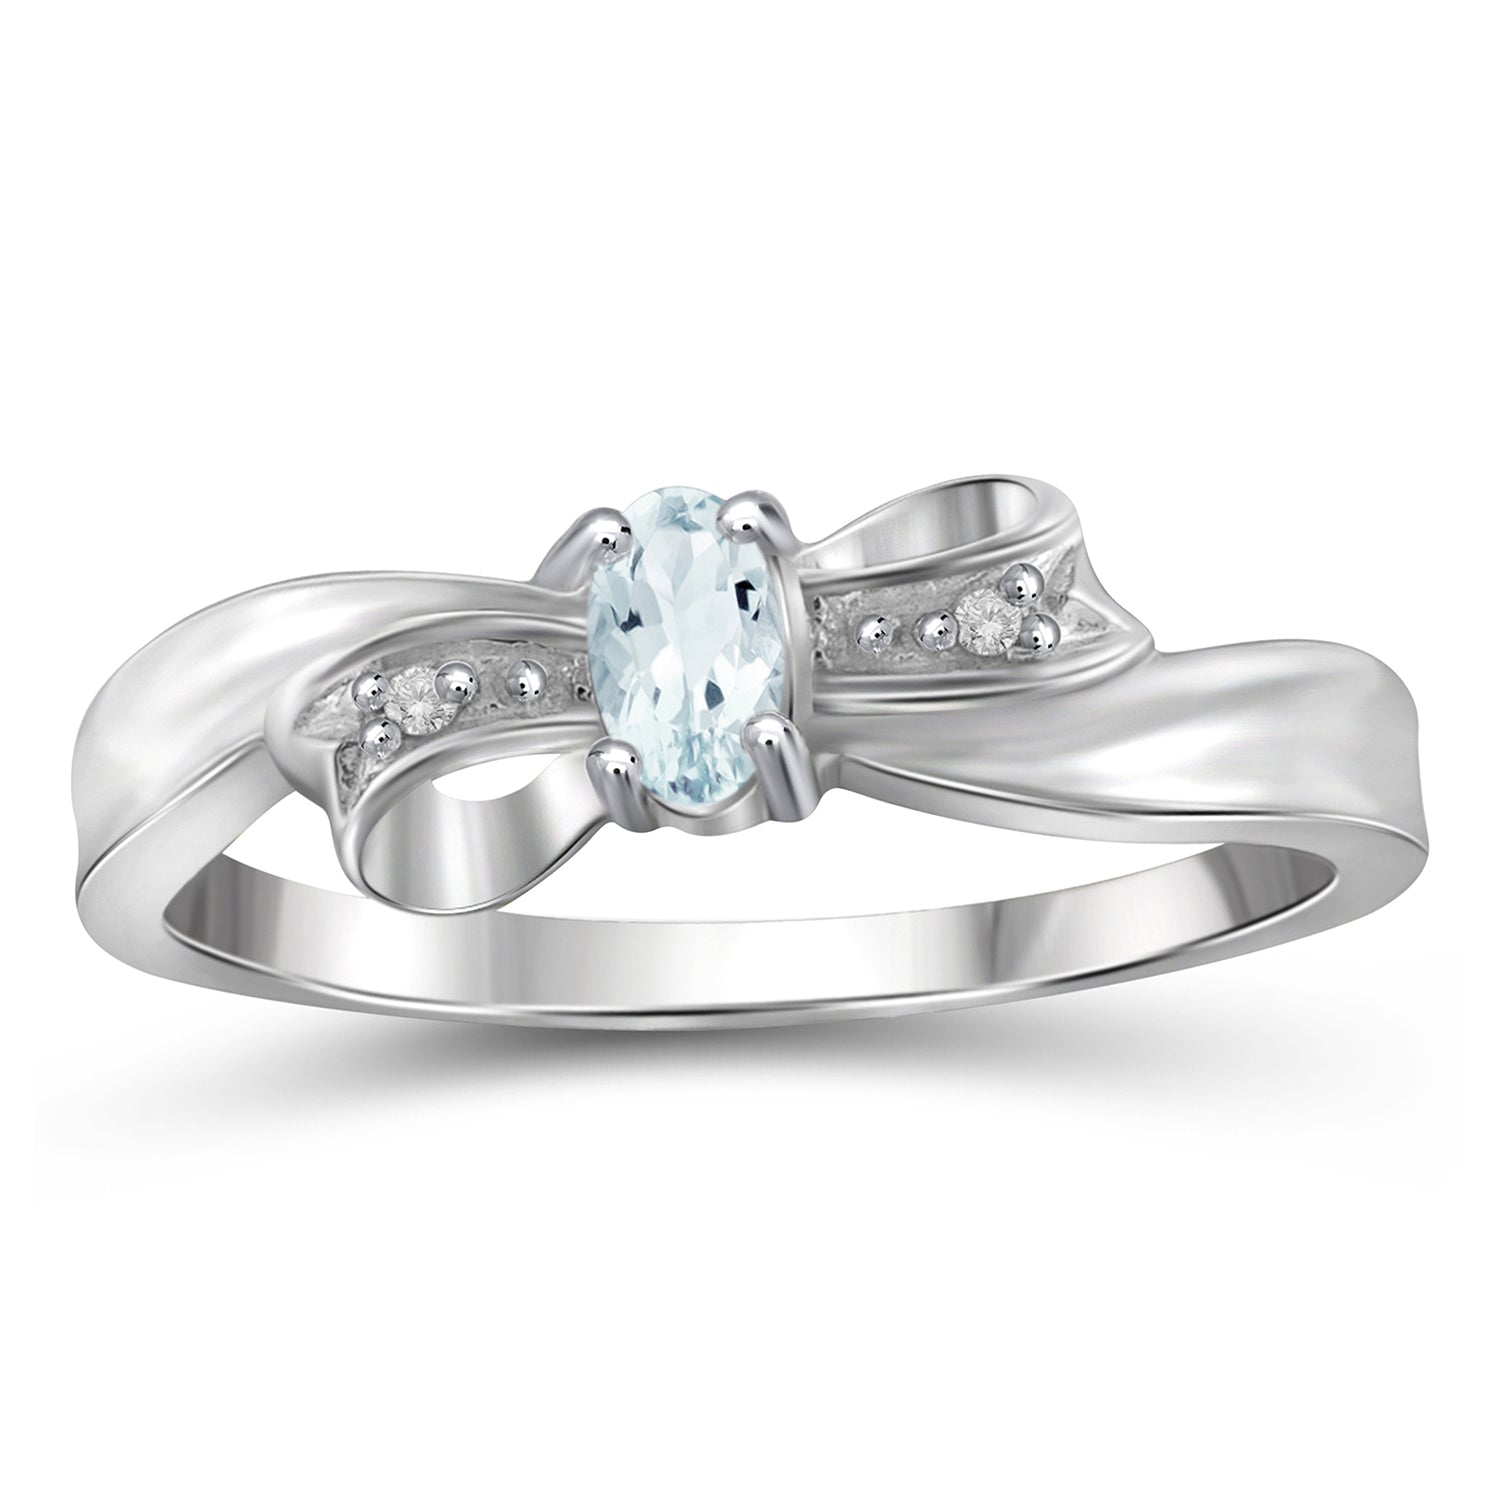 Aquamarine Ring March Birthstone Jewelry – 0.14 Carat Aquamarine Sterling Silver Ring Jewelry with White Diamond Accent – Gemstone Rings with Hypoallergenic Sterling Silver Or 14K Gold PlatedBand